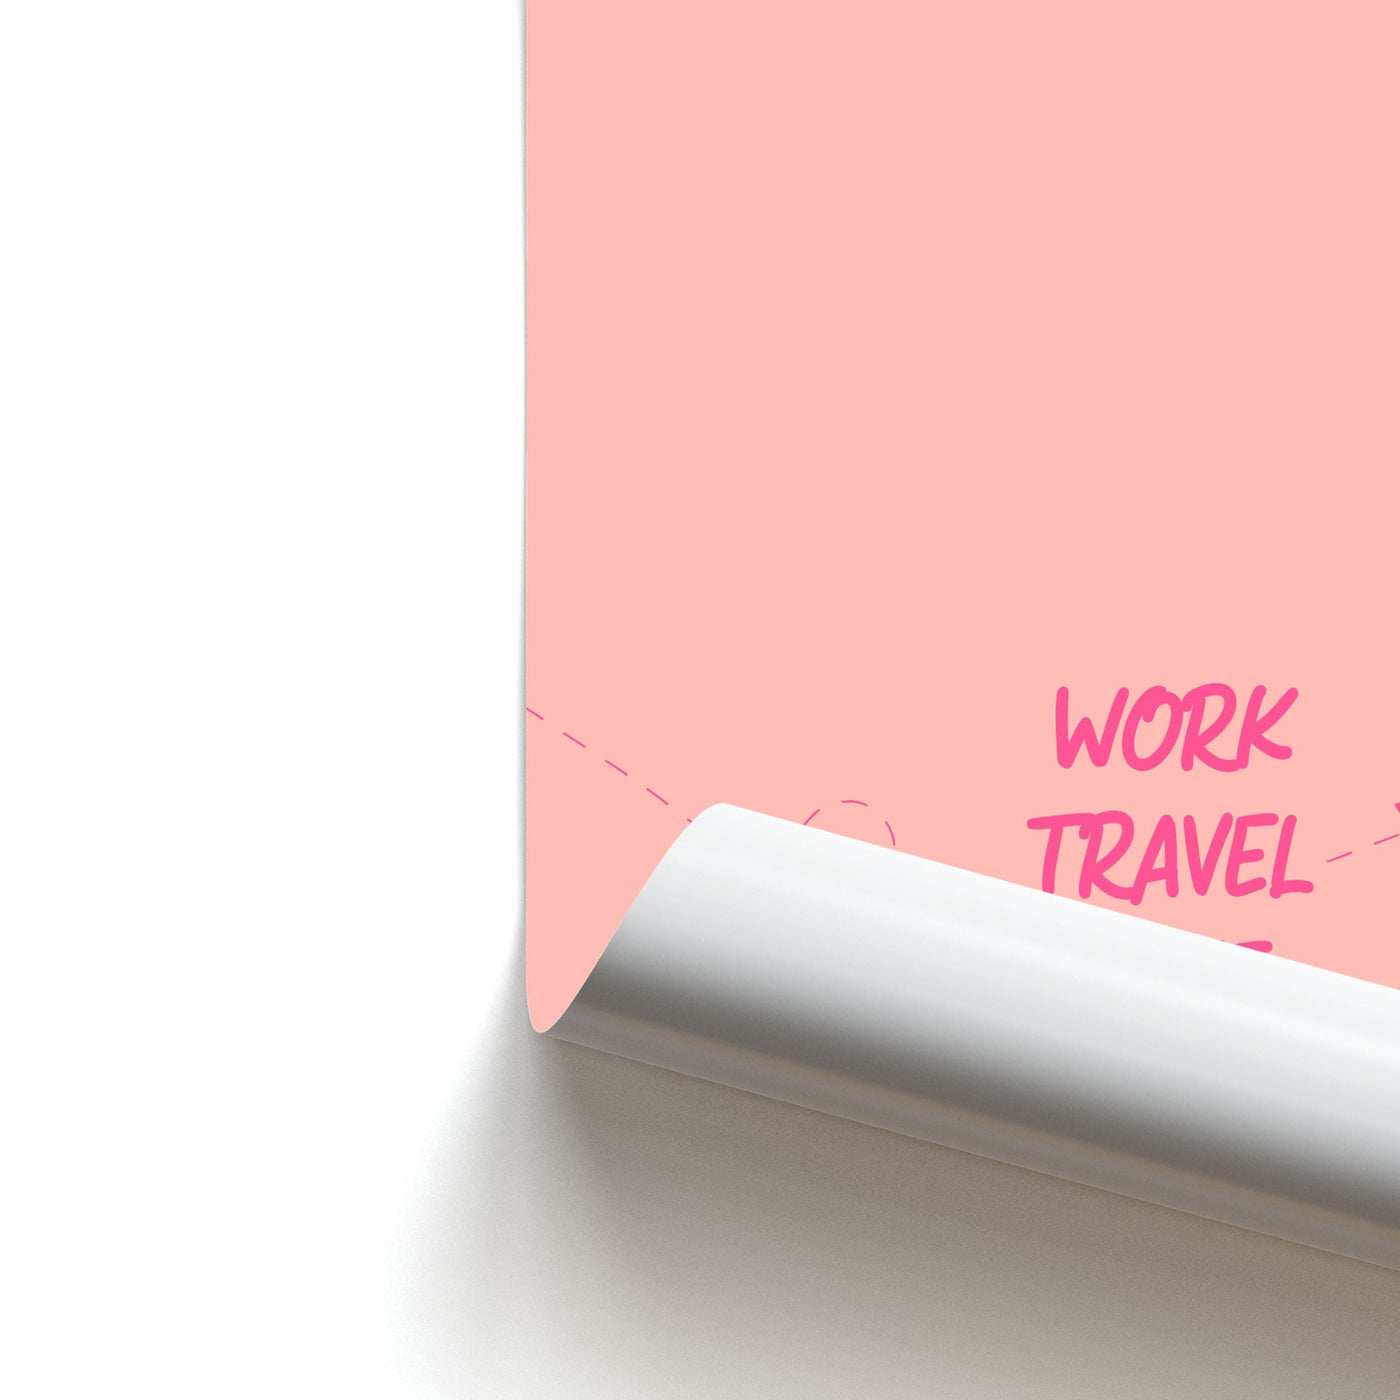 Work Travel Save Repeat - Travel Poster